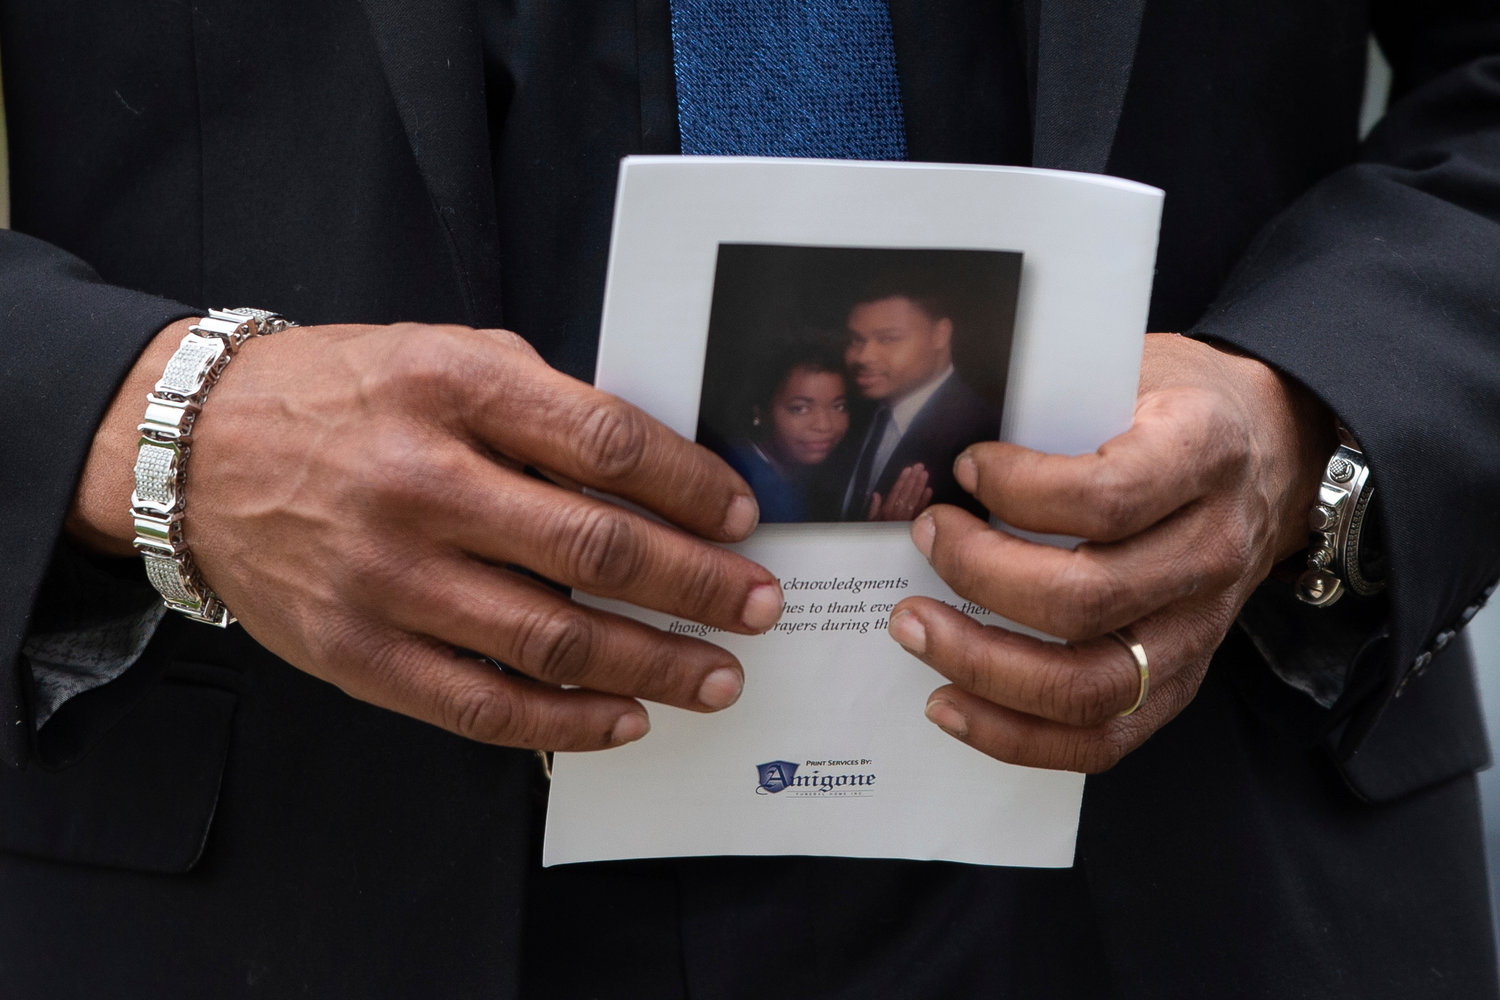 A person holds a program for the funeral service for Aaron Salter Jr. at The Chapel on Crosspoint on Wednesday, May 25, 2022, in Getzville, N.Y. Salter Jr. was killed in the Buffalo supermarket shooting on May 14. (AP Photo/Joshua Bessex)